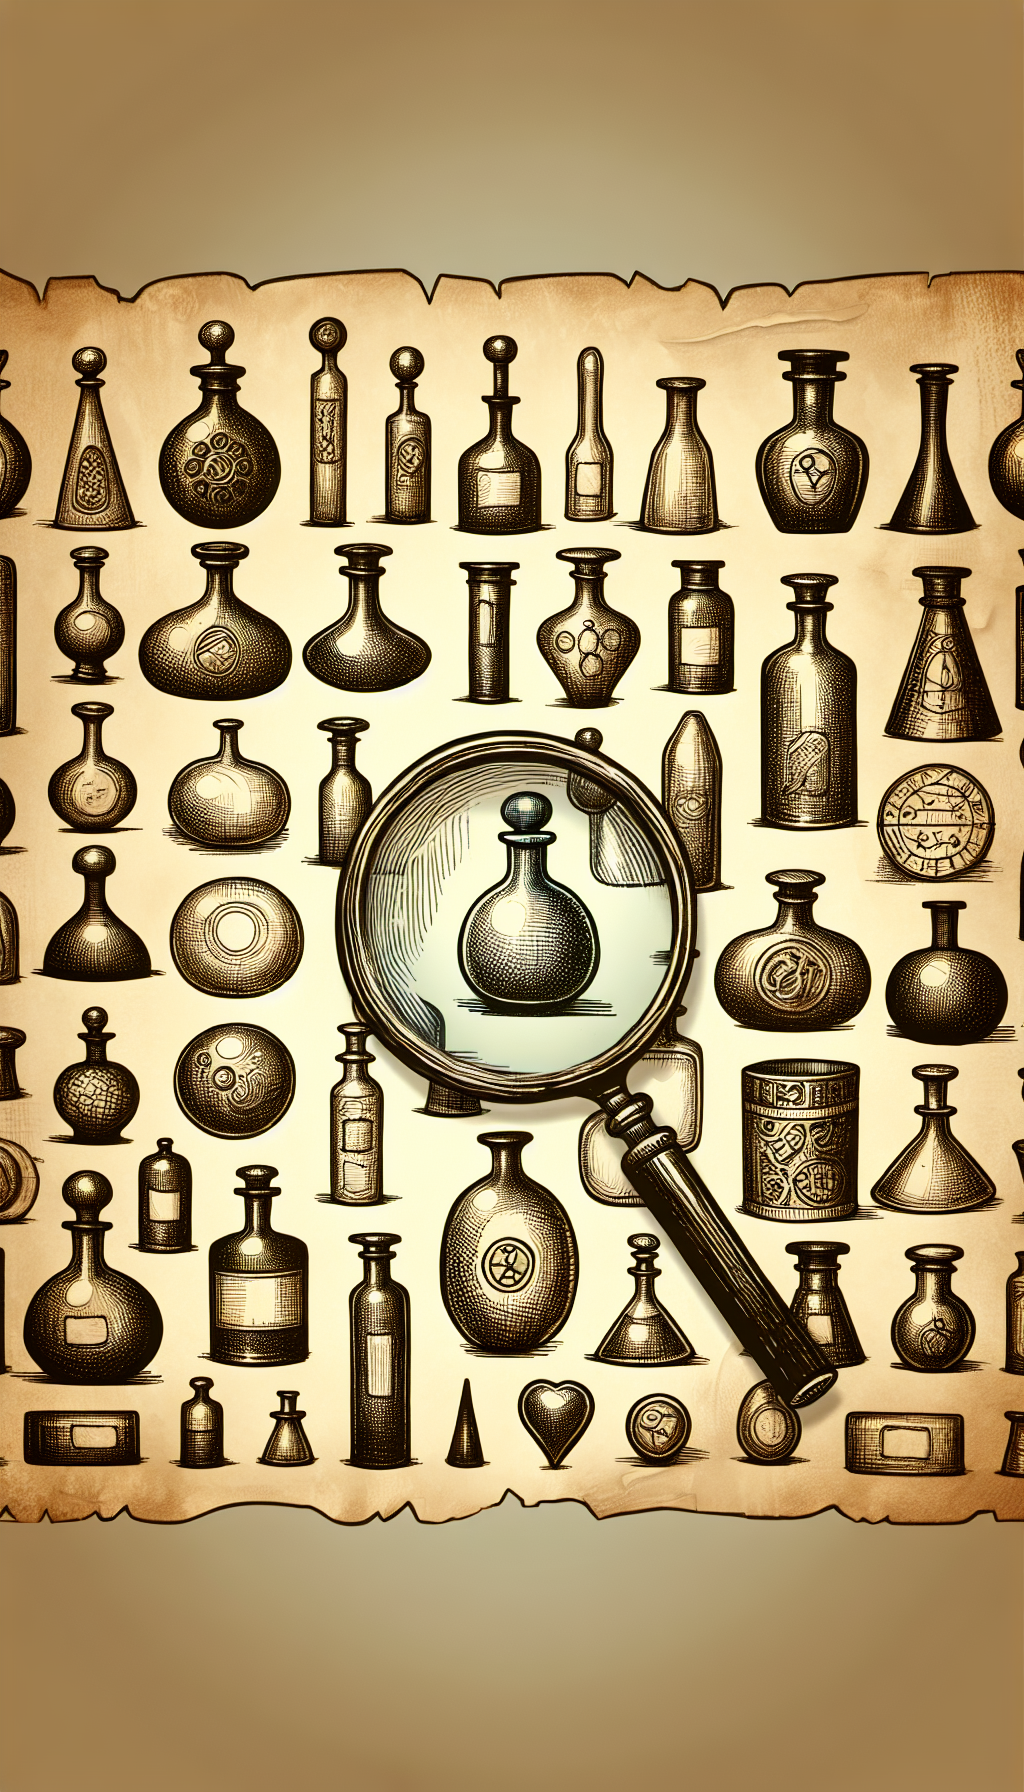 An illustration displays a variety of ancient apothecary bottles, each with a distinct shape – bulbous, elongated, flat-sided – sketched in whimsical, sepia-toned lines atop an aged parchment background. A magnifying glass hovers over a select few, revealing their intricate glass patterns and embossed labels, with a ghostly overlay of symbols and text denoting their historical uses.